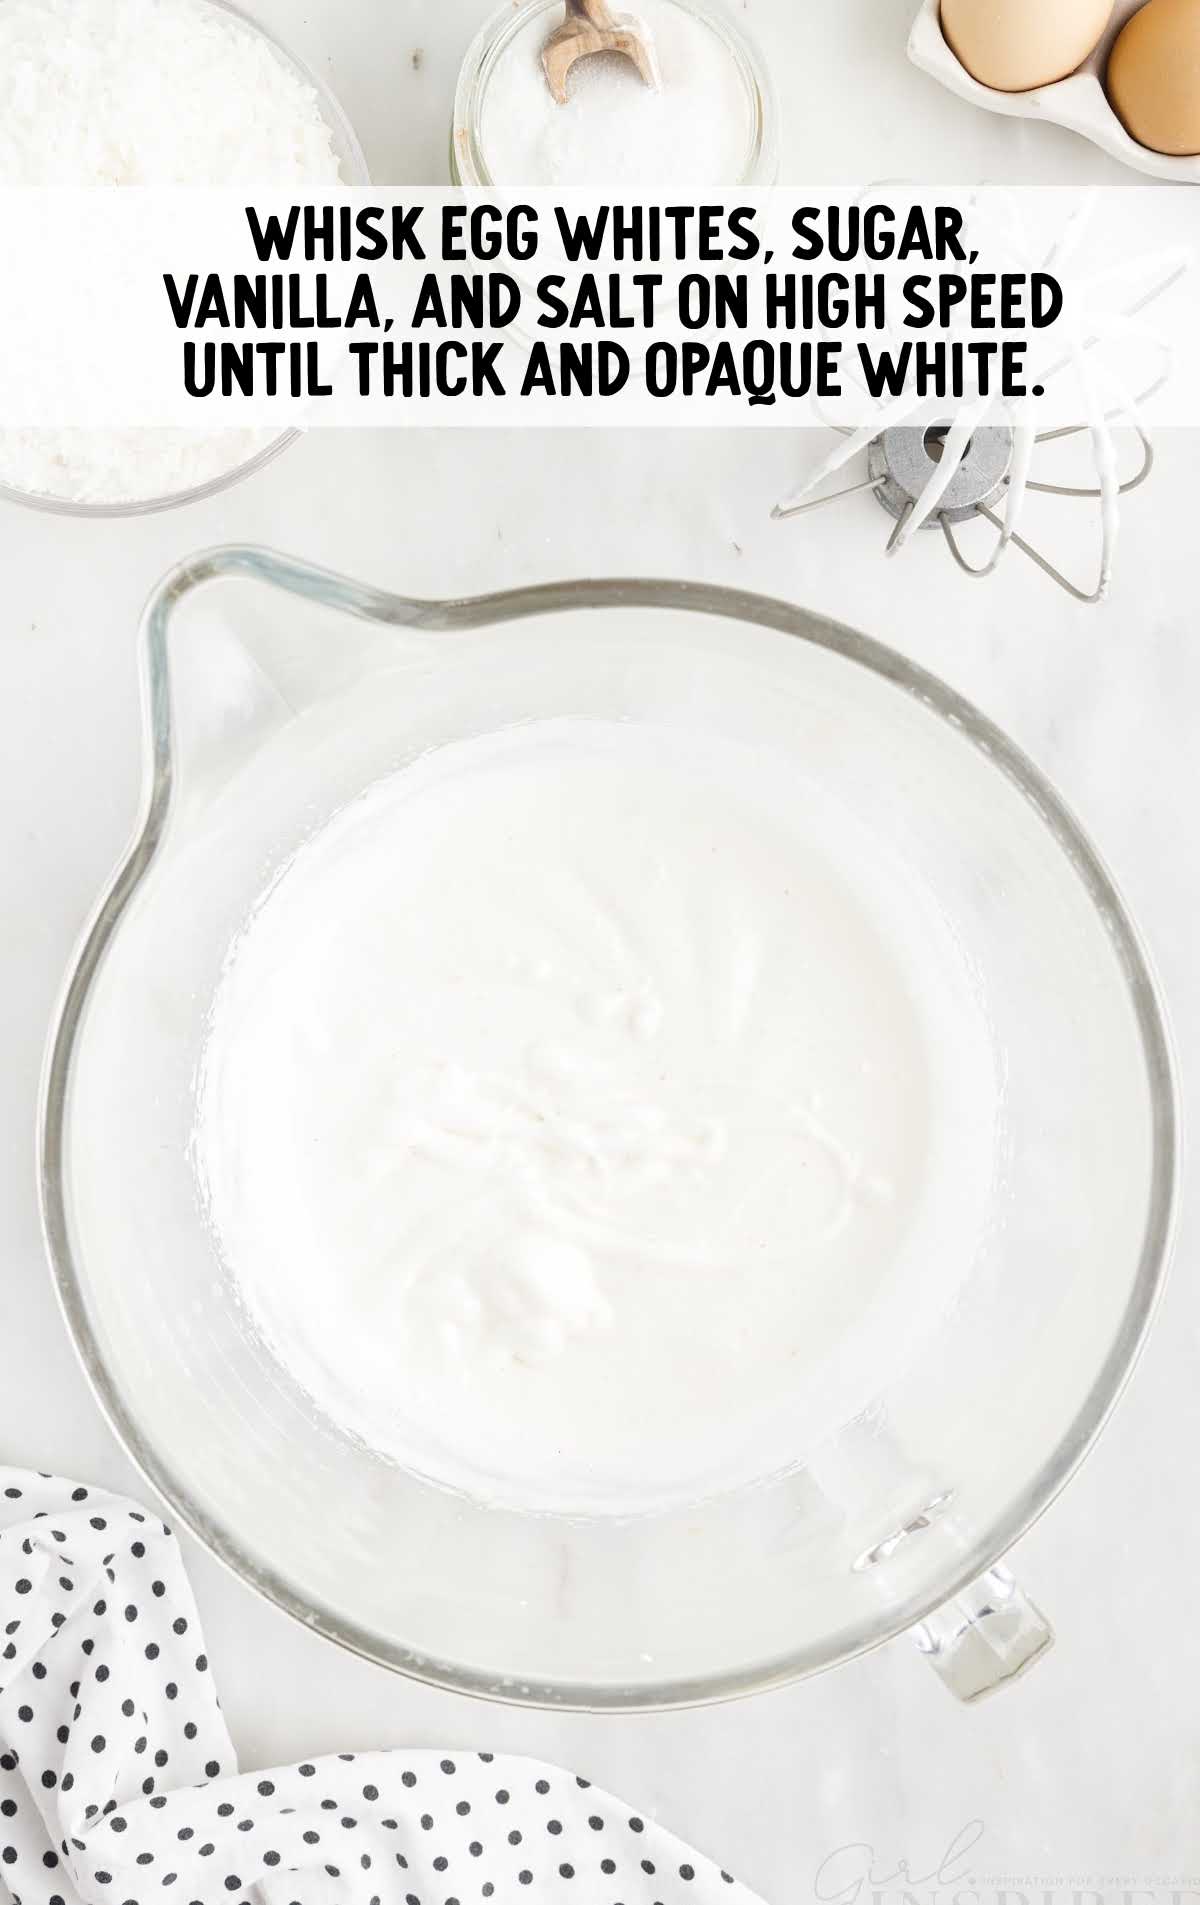 egg whites, sugar, vanilla, and salt whisked in a bowl